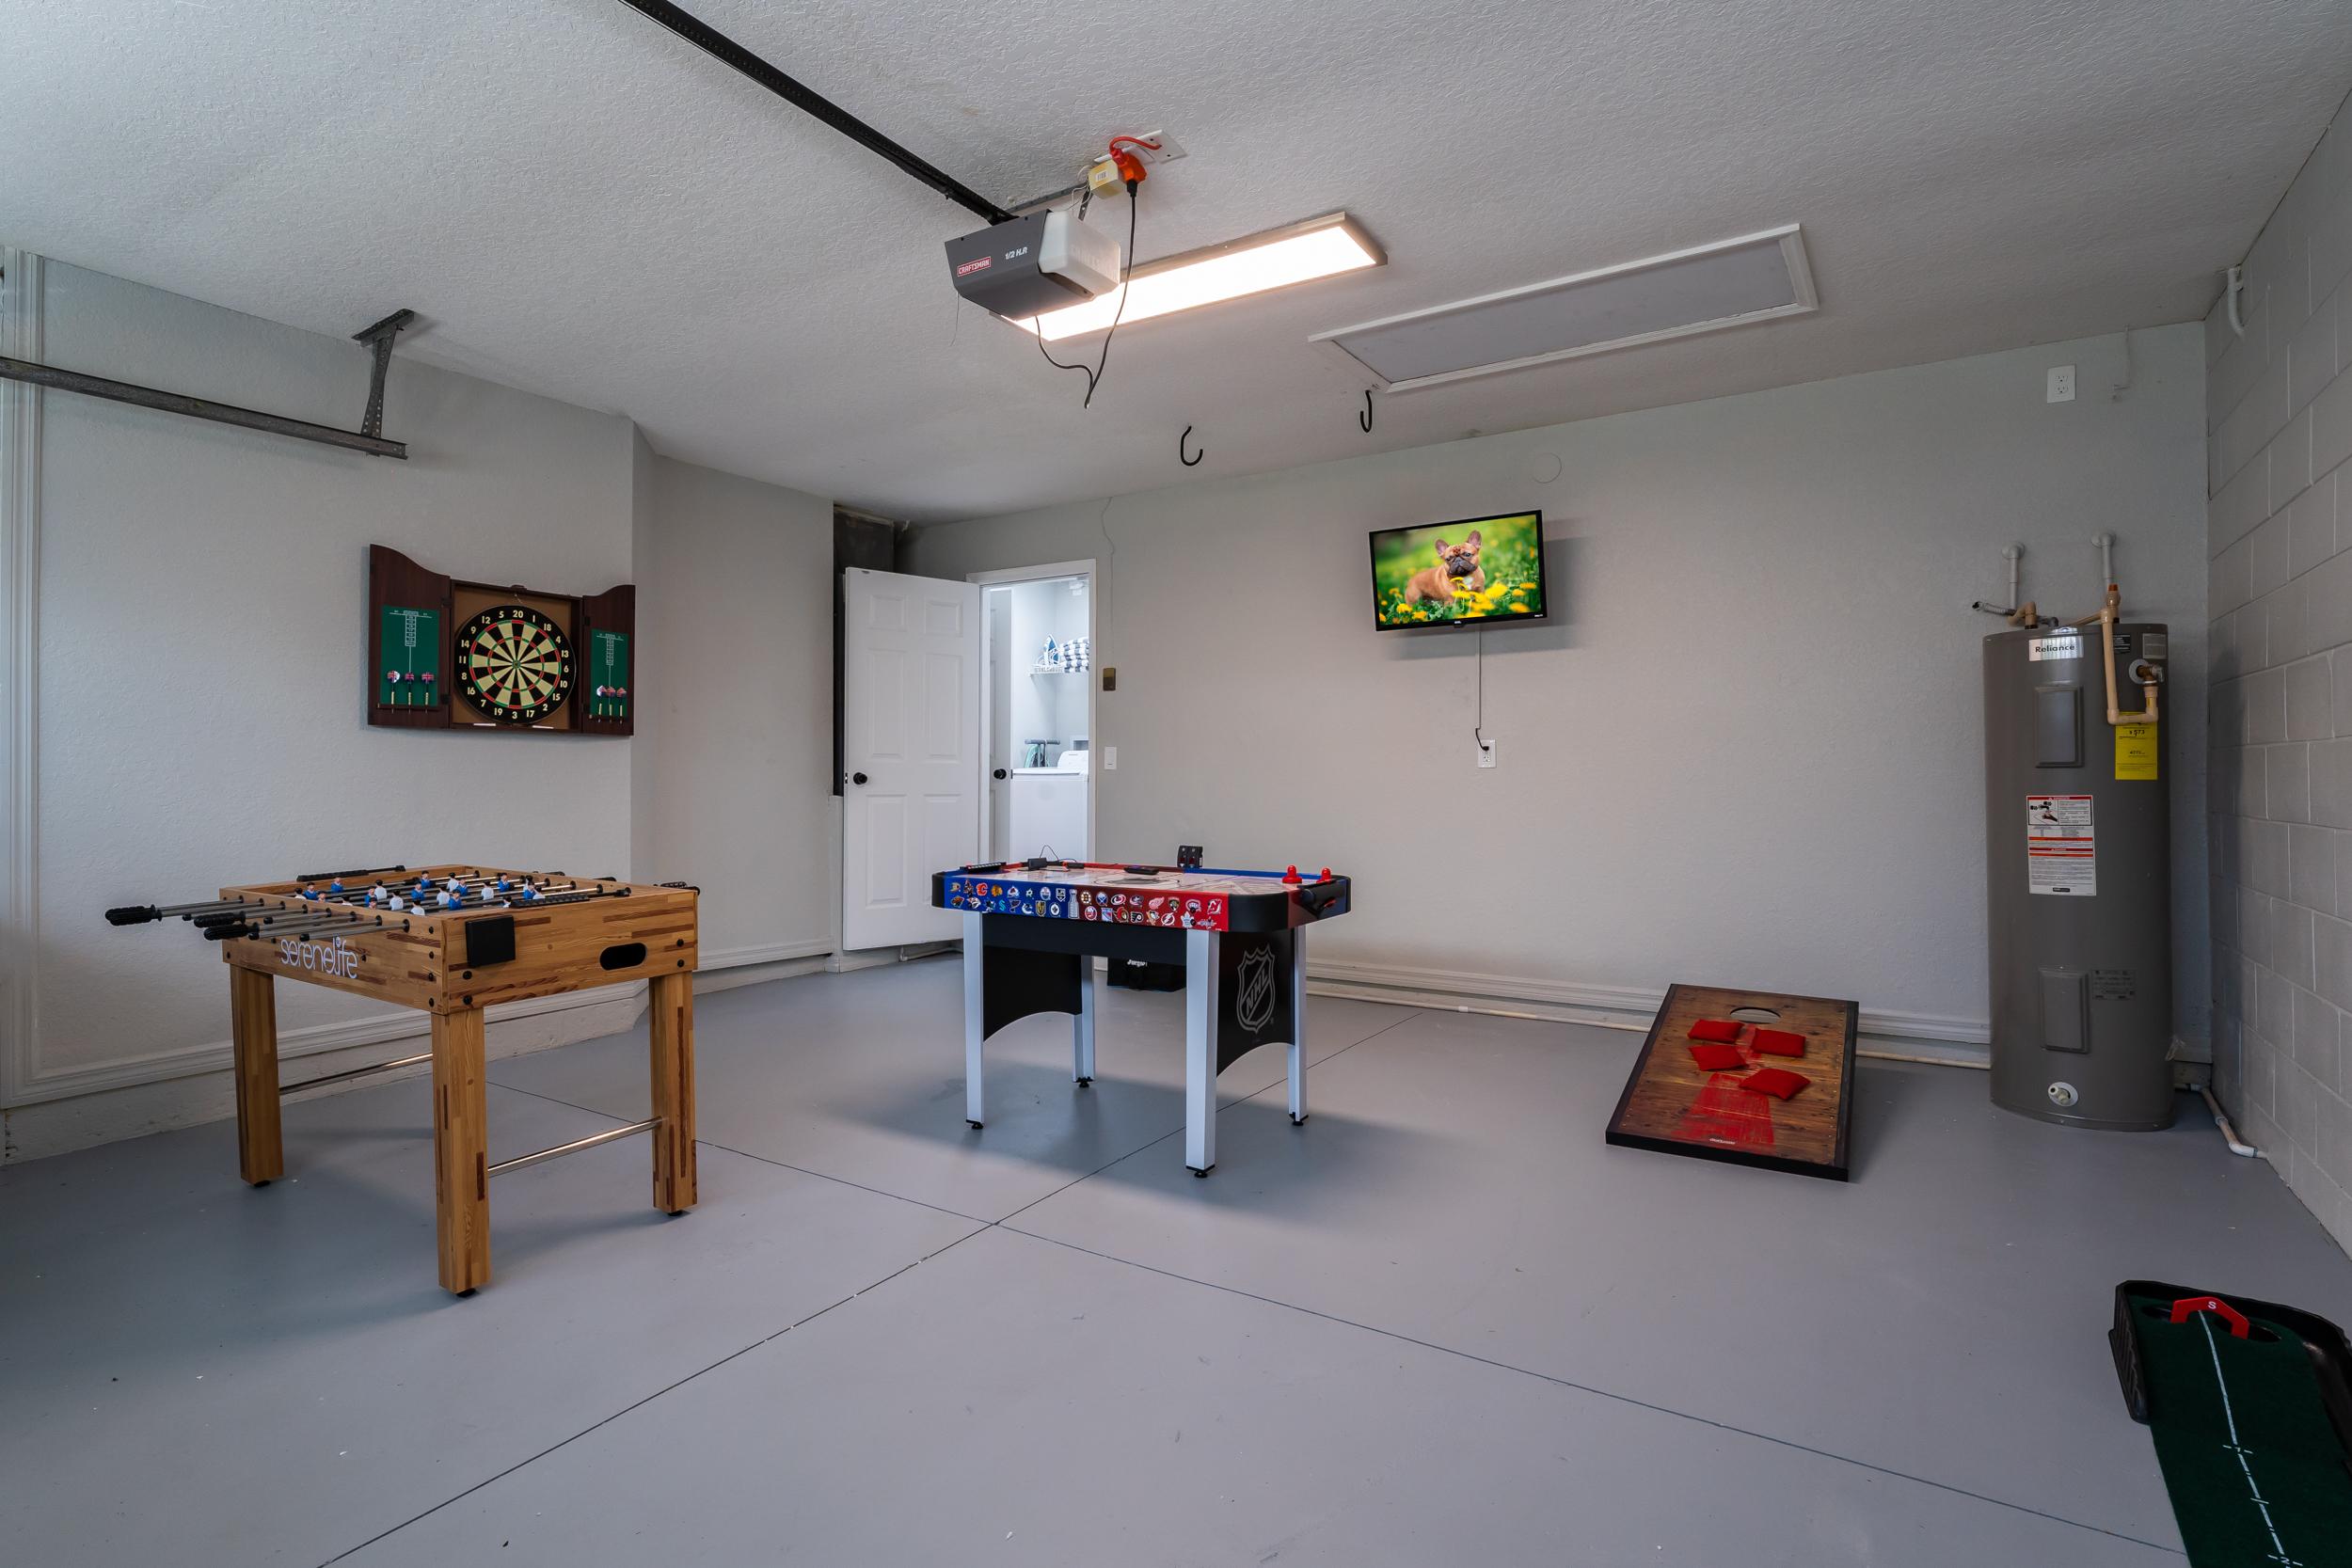 Fun-filled Game Room in Garage with TV, Foosball, Air Hockey, and Various Board Games